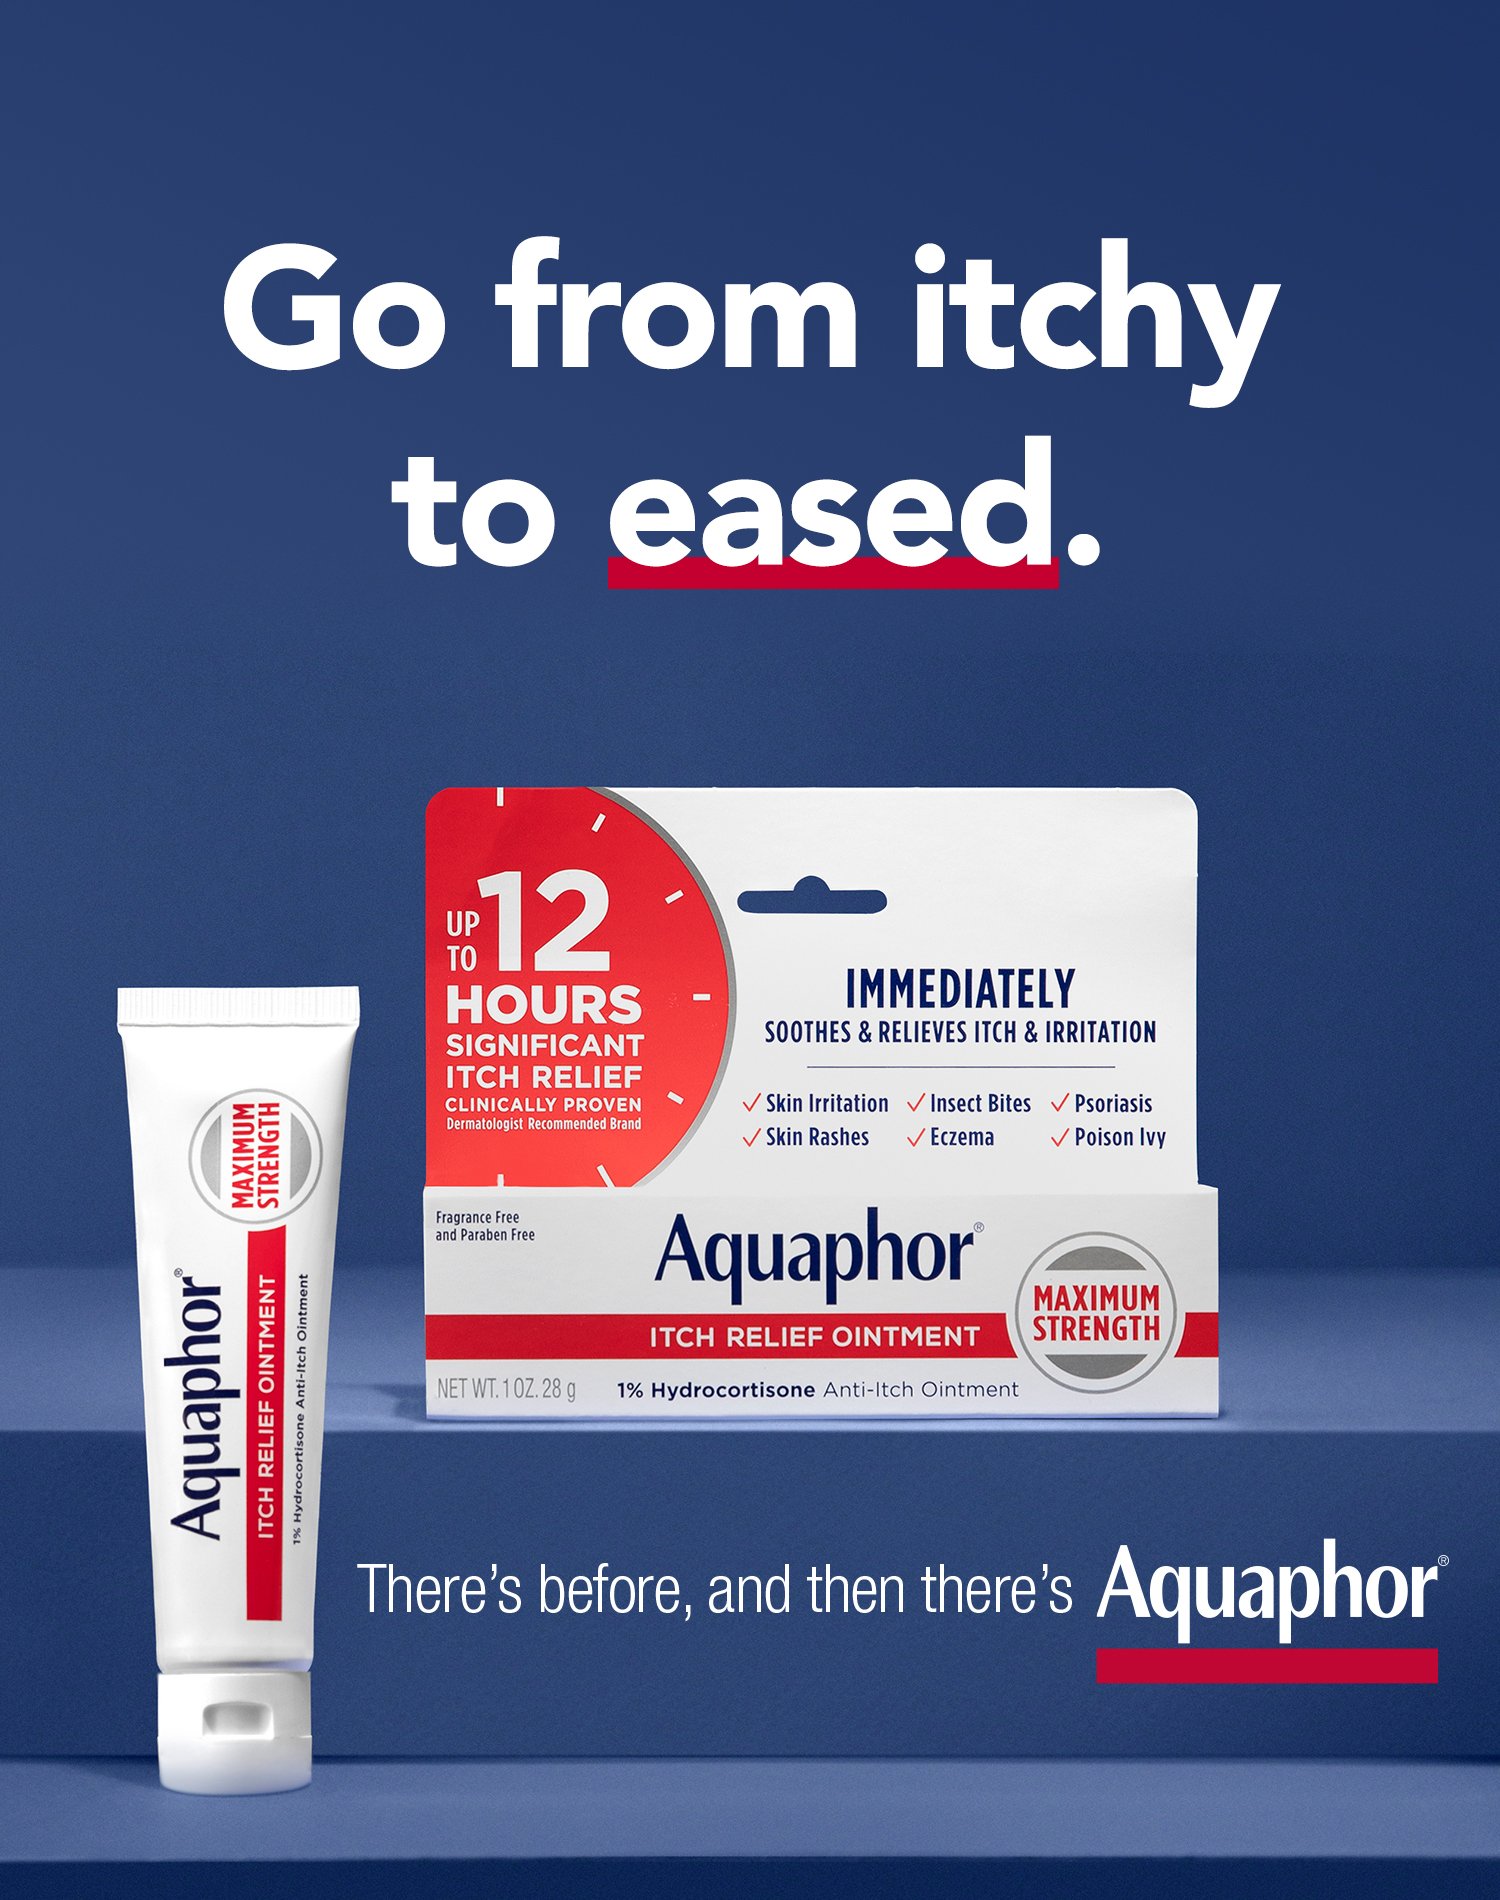 FREE Sample of Aquaphor Itch Relief Ointment